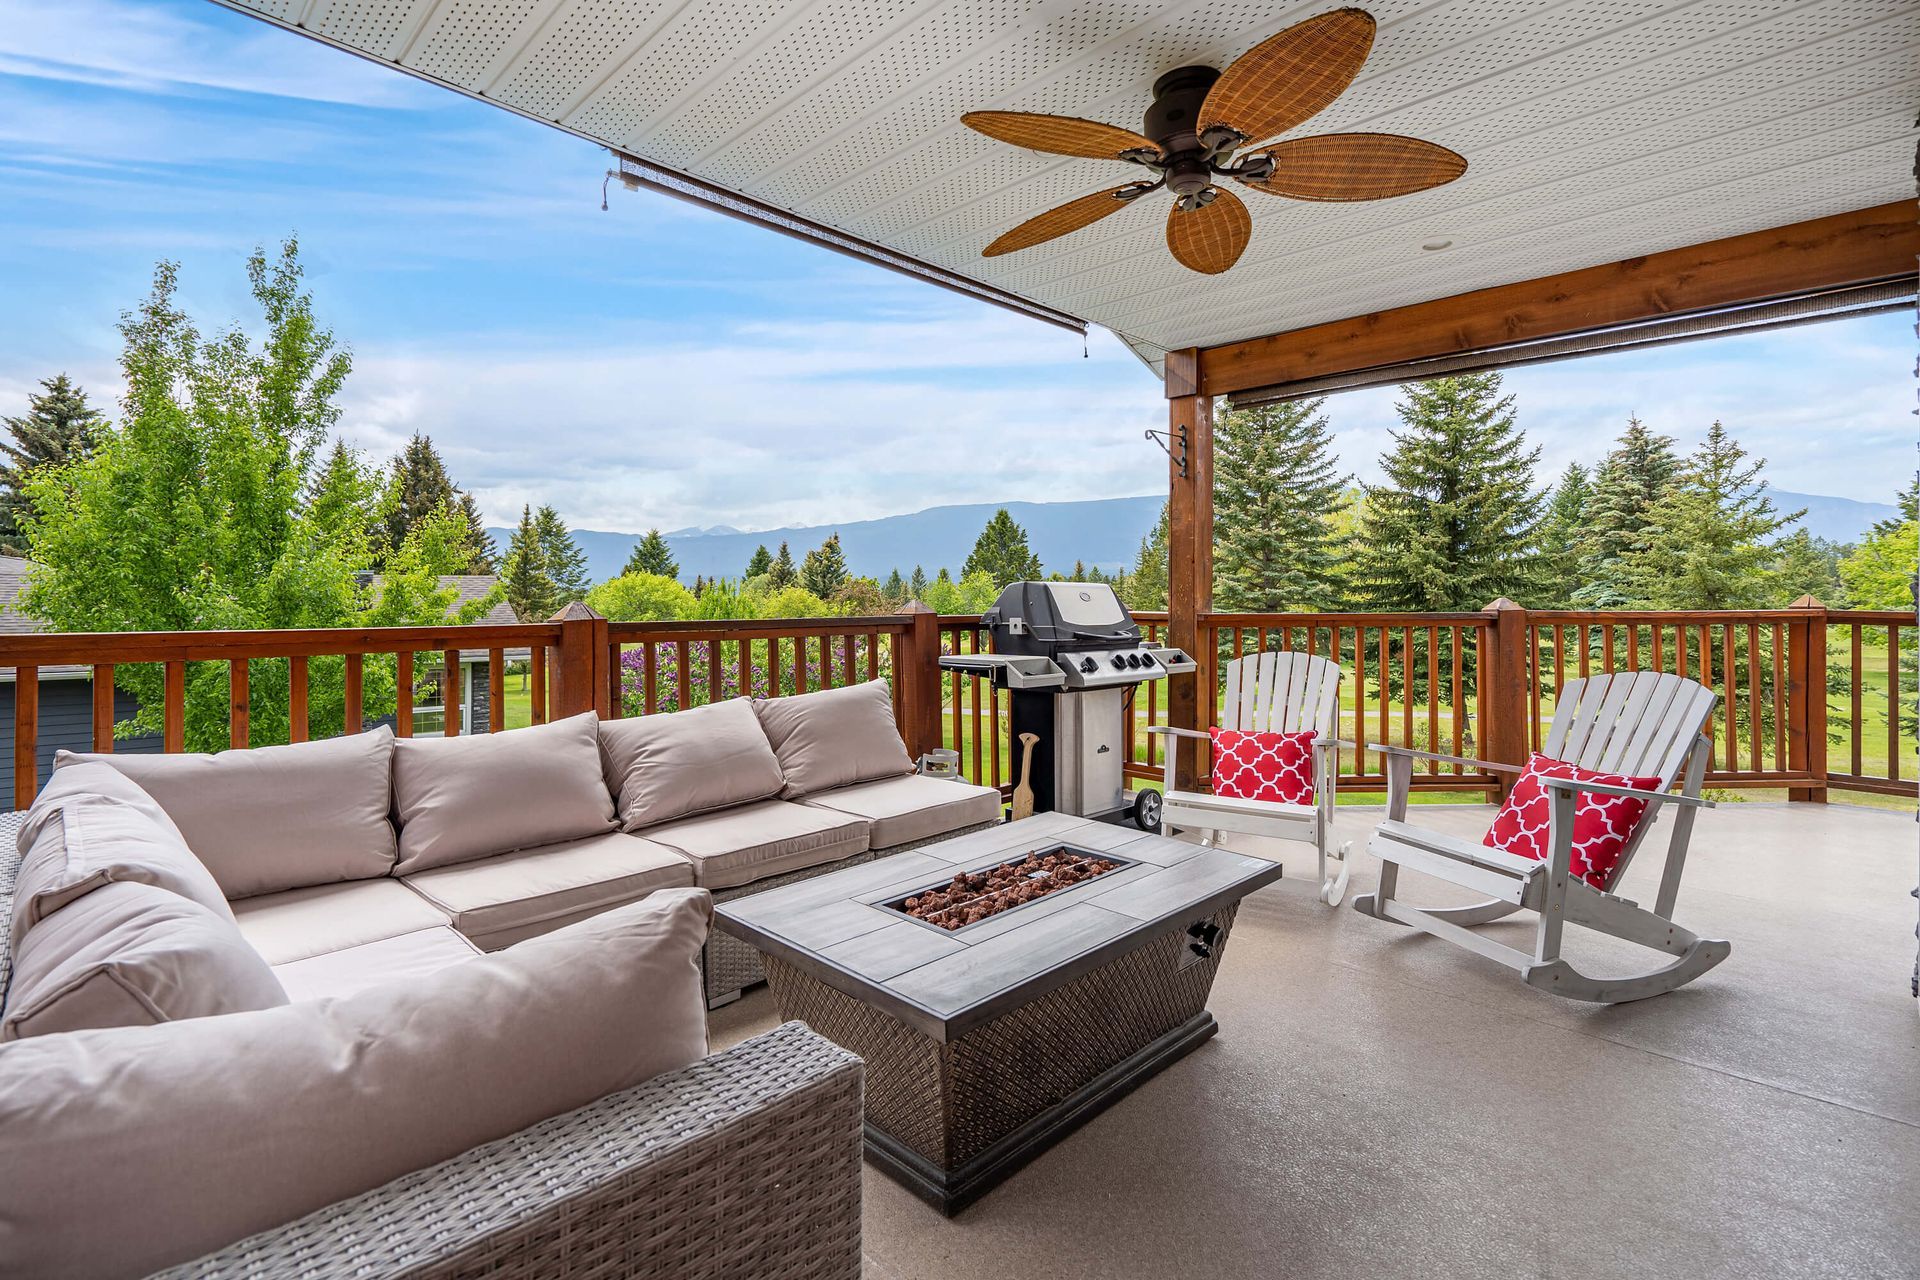 Patio dining set of  of the Fairway17, a Windermere BC Vacation Rental hosted by Aisling Baile Property Management.